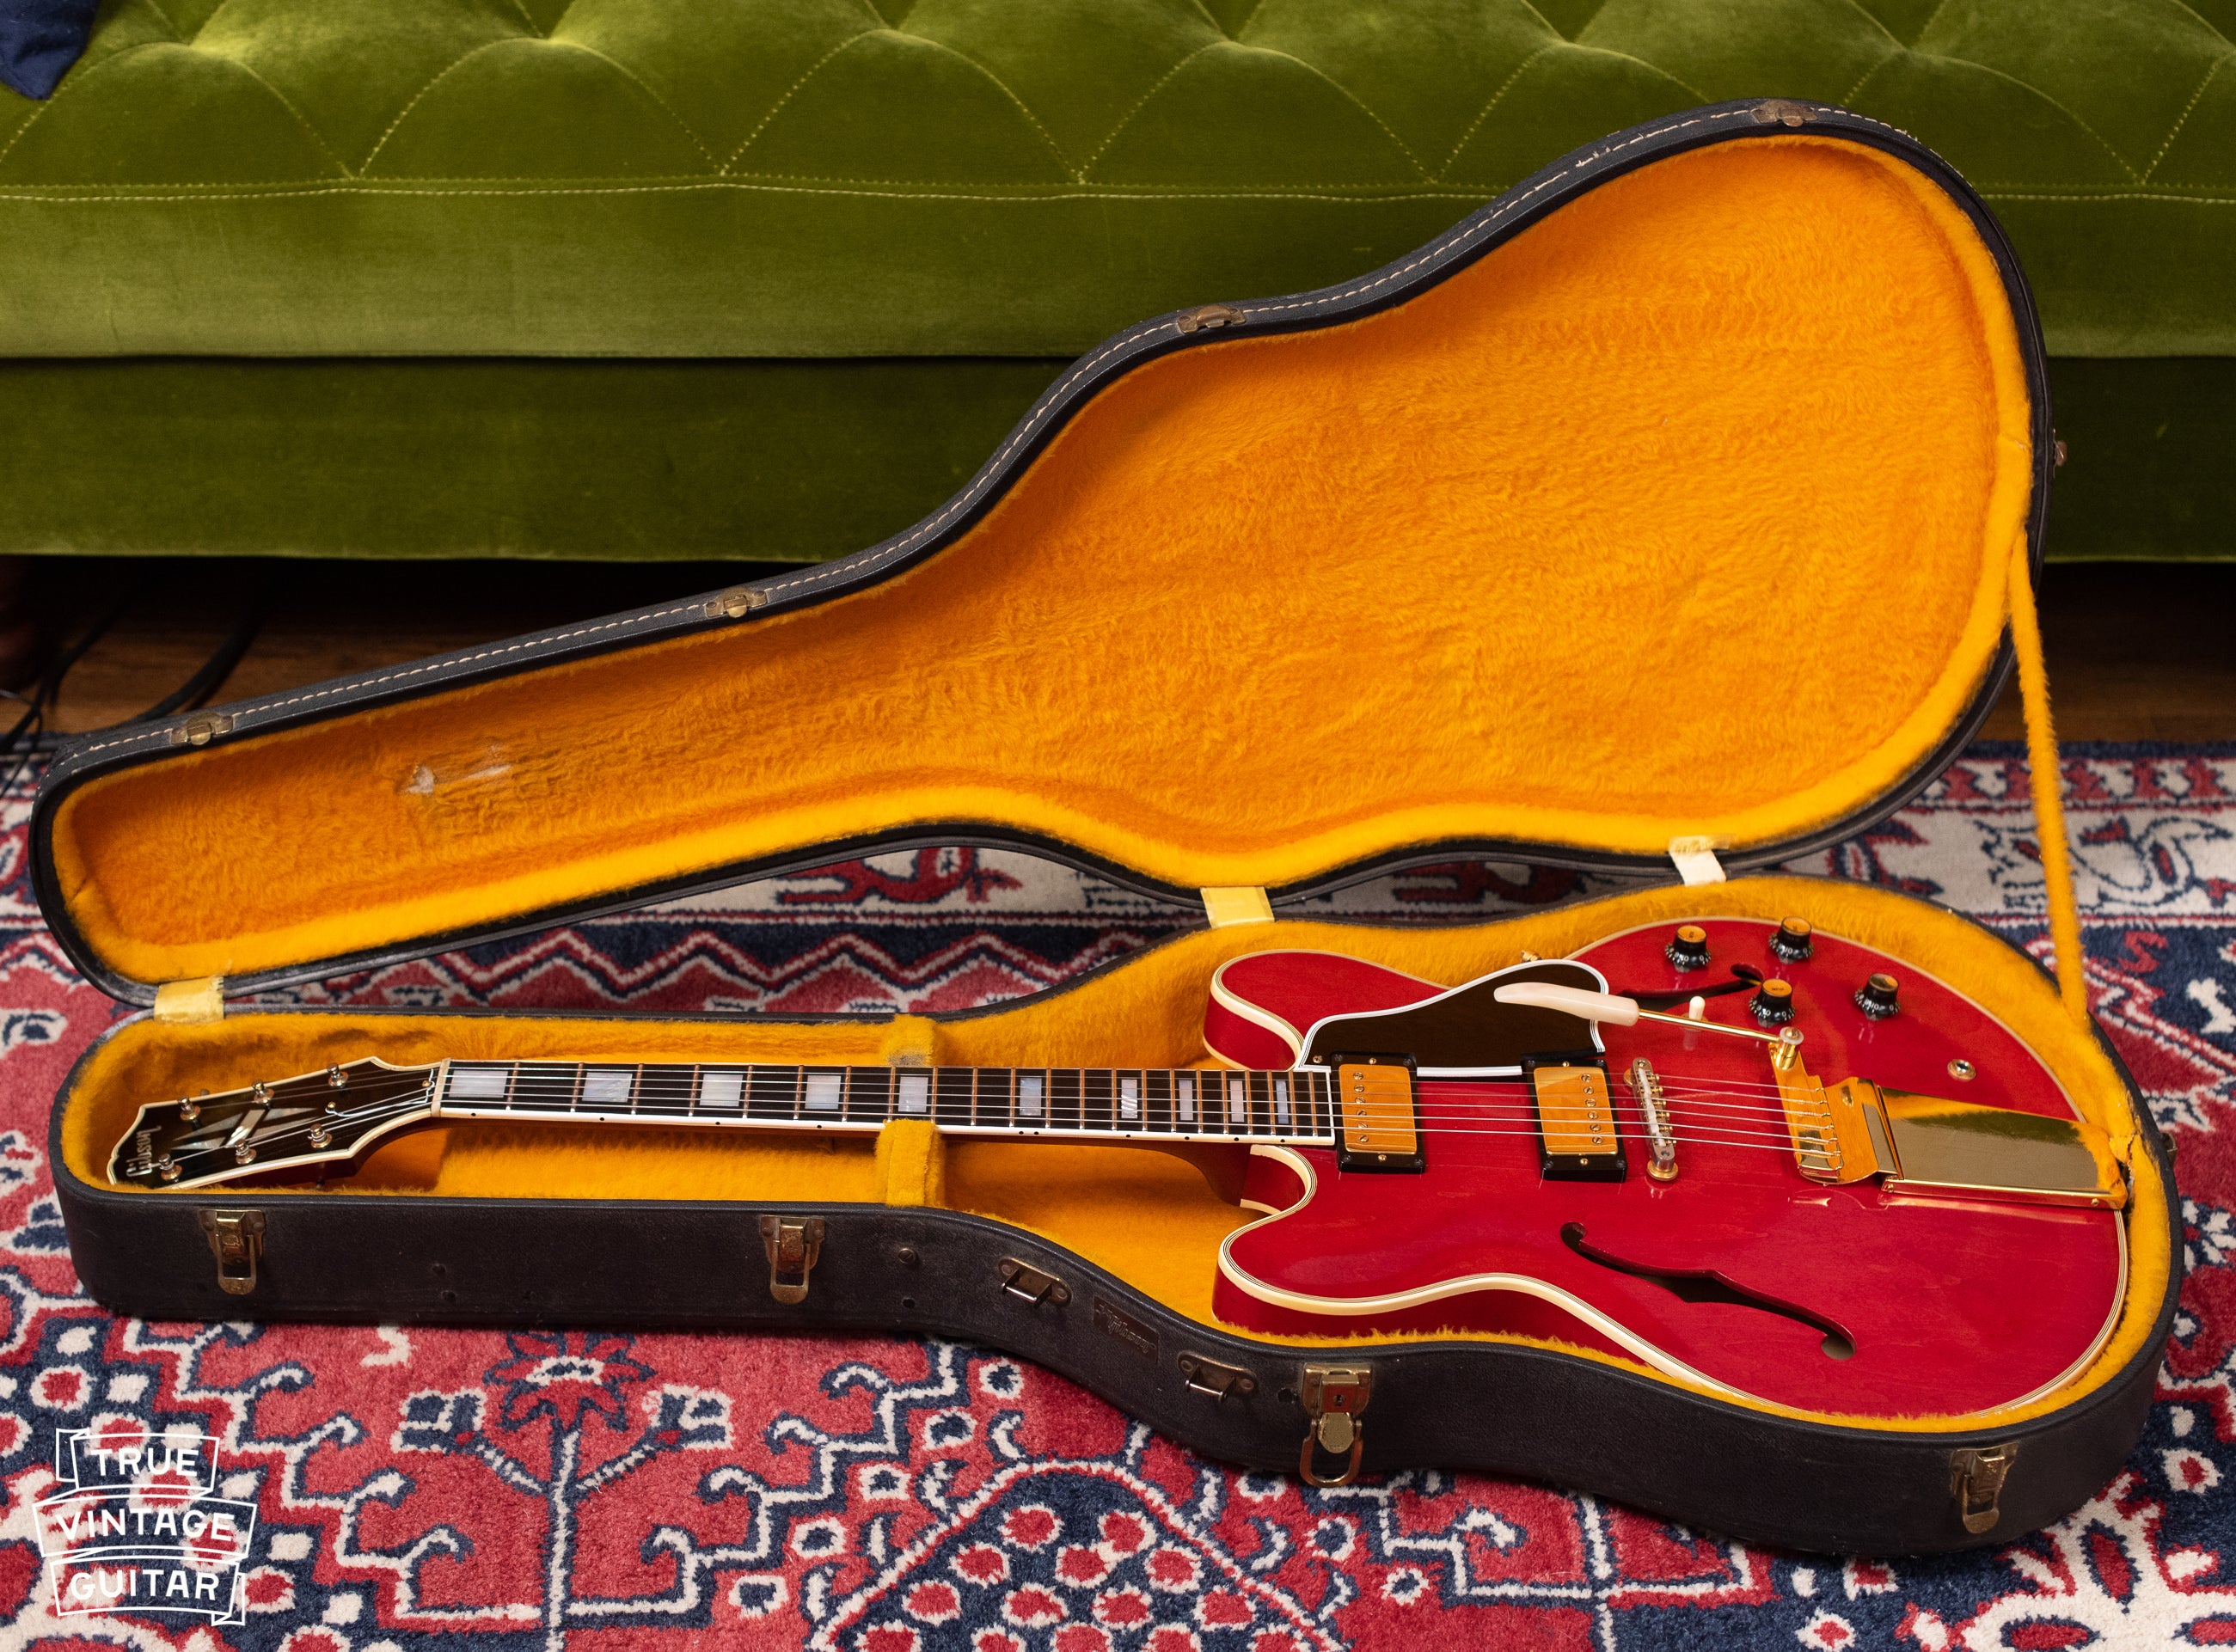 1965 Gibson ES-355 cherry red electric guitar classic vintage antique